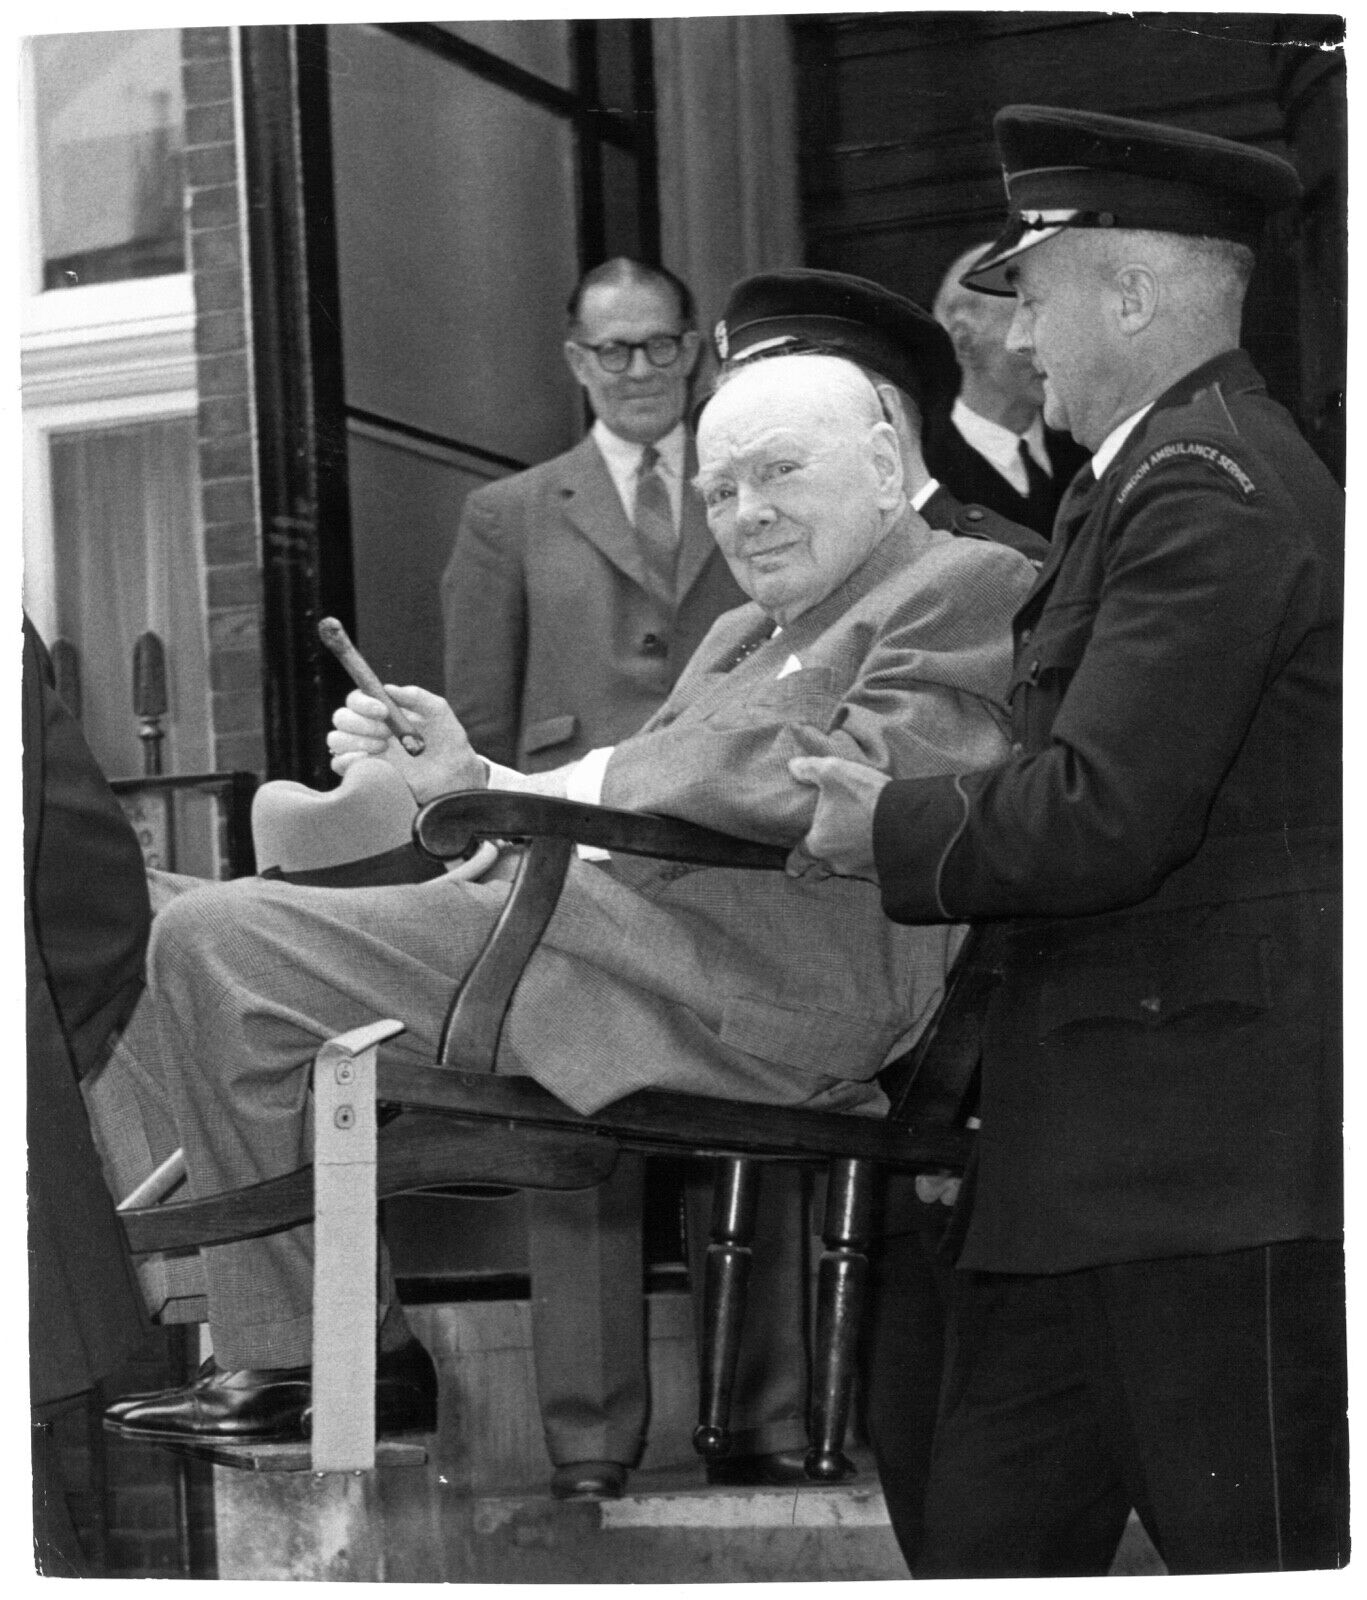 21 August 1962 press photo of Sir Winston S. Churchill, cigar in hand